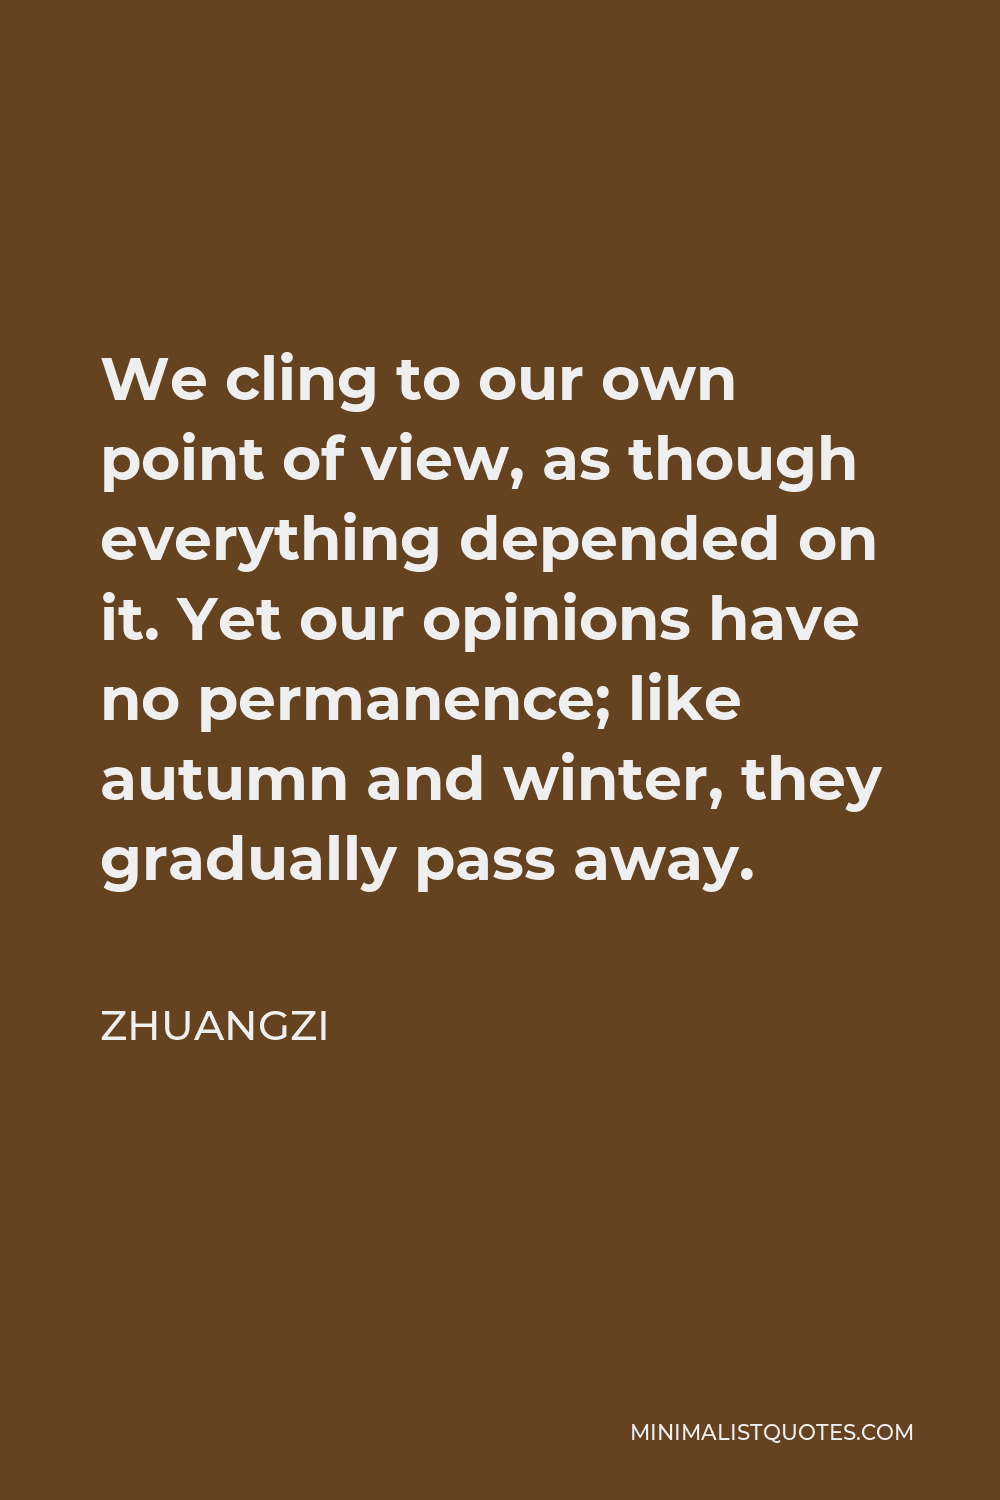 Zhuangzi Quote - We cling to our own point of view, as though everything depended on it. Yet our opinions have no permanence; like autumn and winter, they gradually pass away.